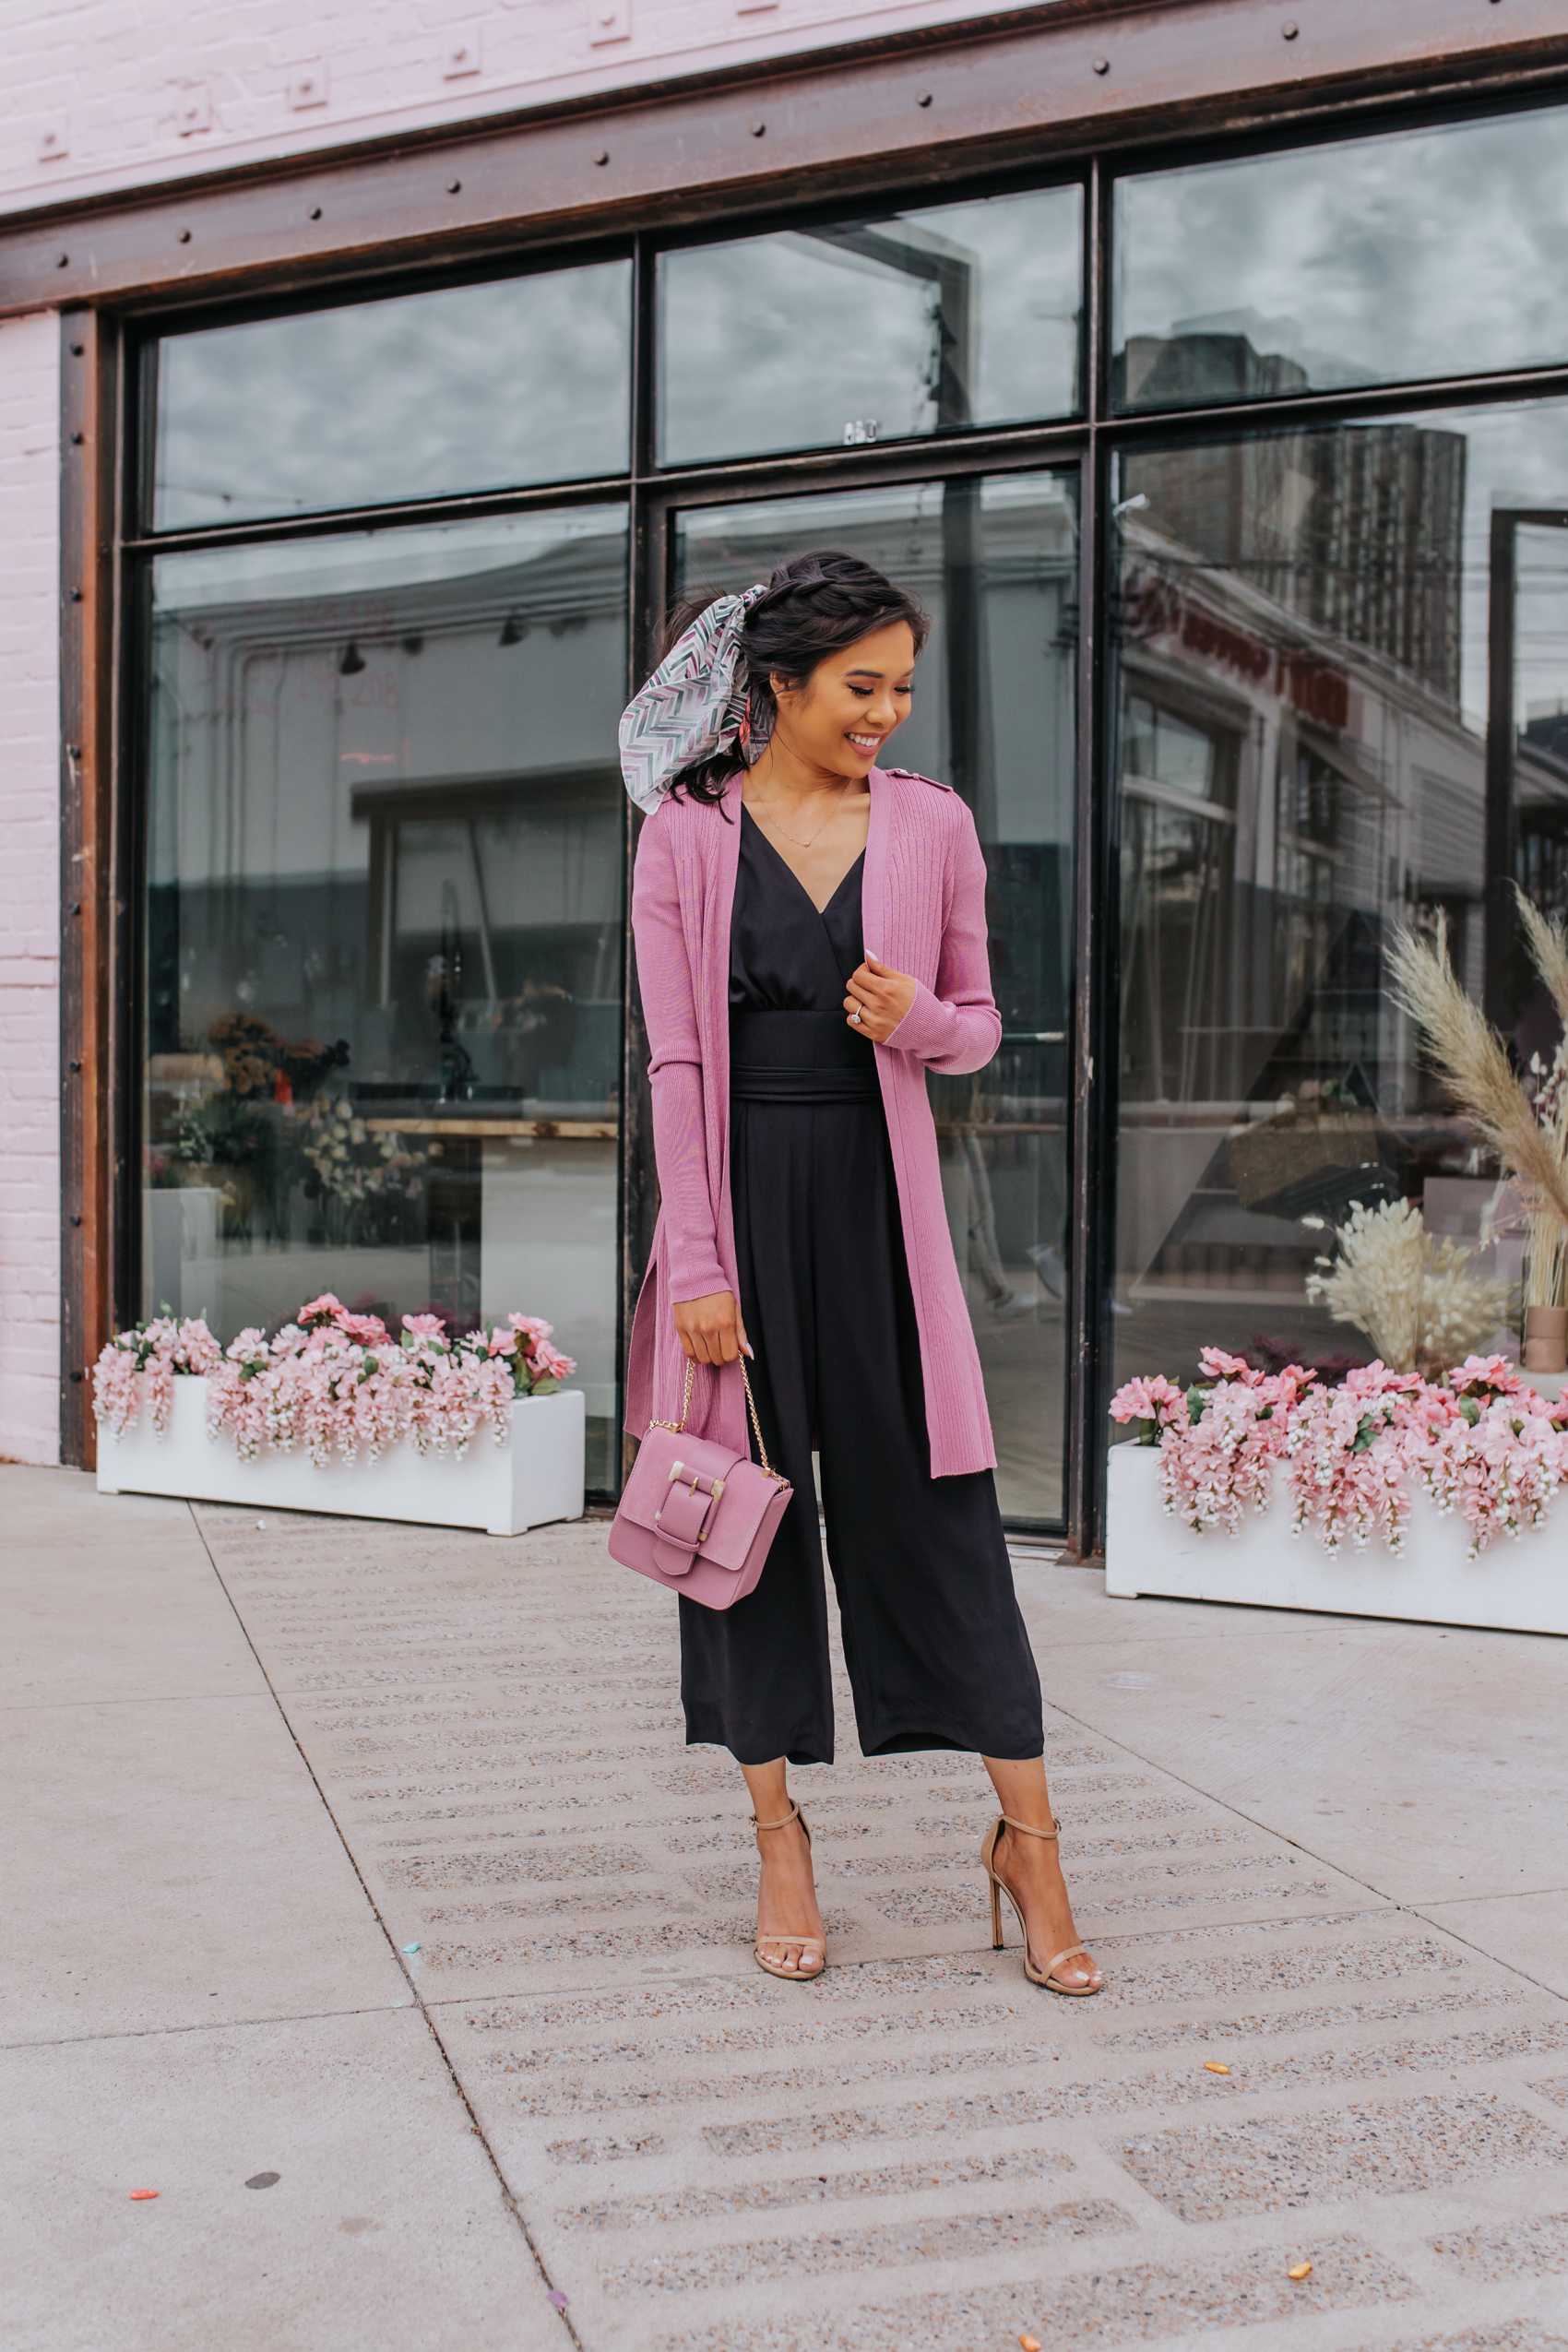 Hoang-Kim styles a spring outfit with a black jumpsuit, pink cardigan, chevron hair scarf, heeled sandals and a pink mini bag